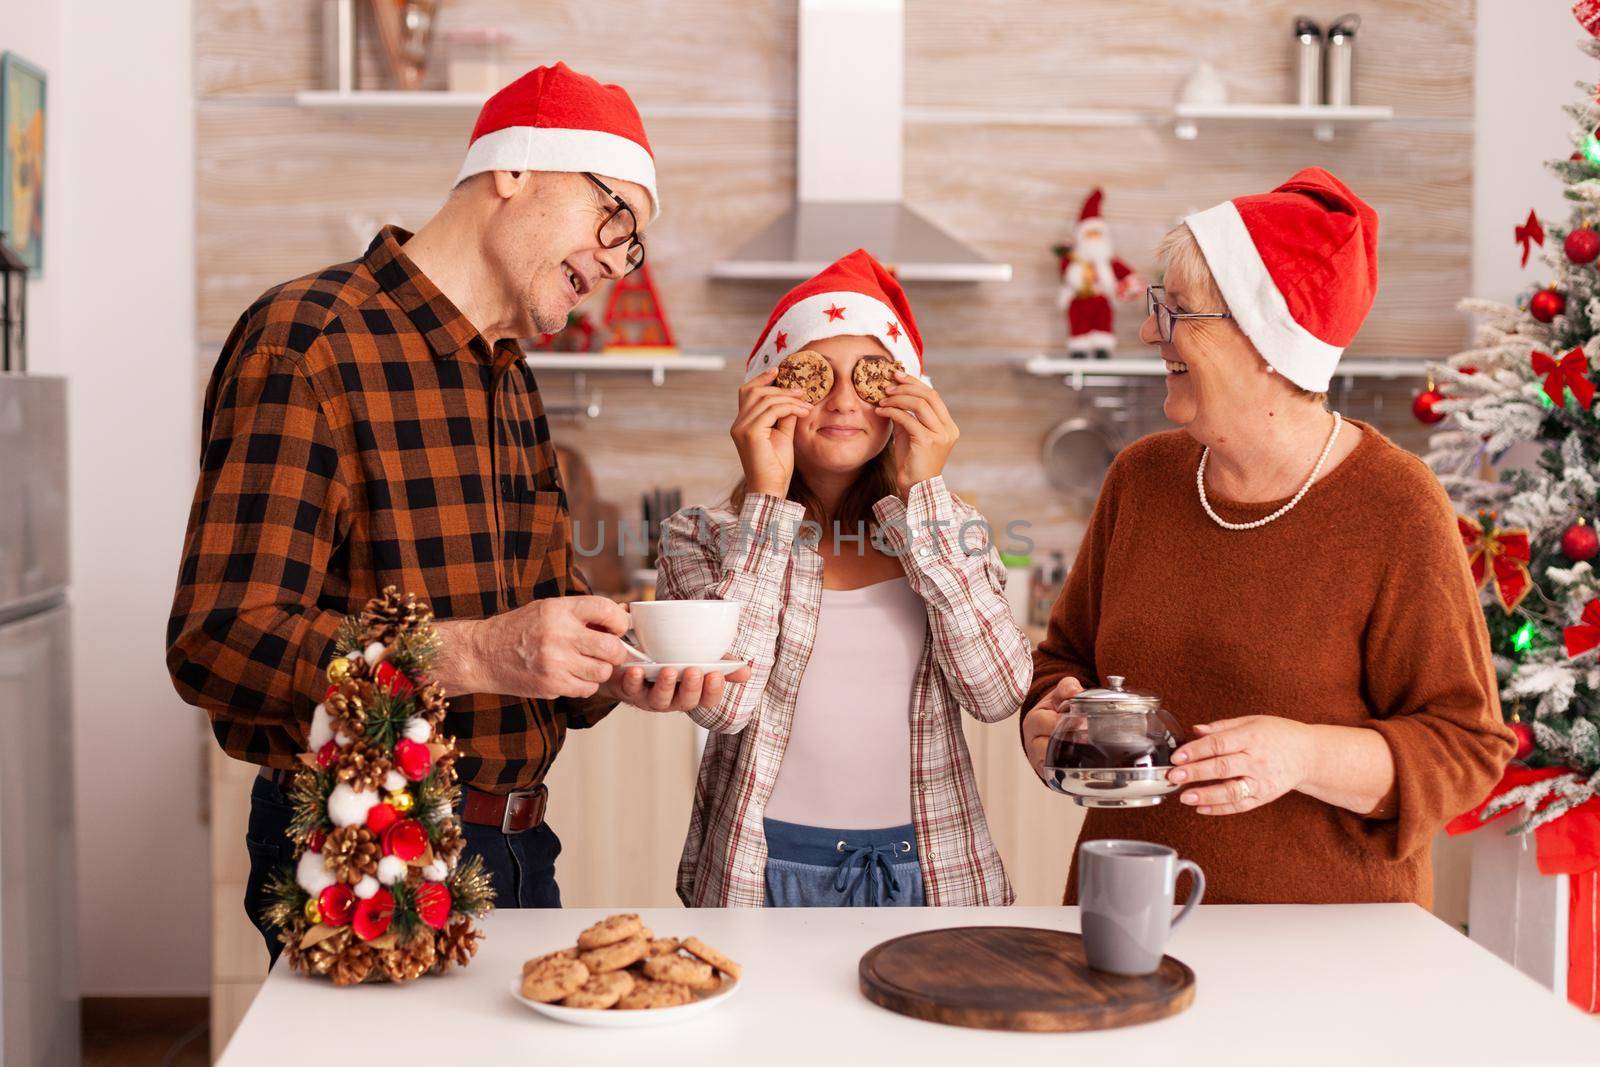 Happy family celebrating christmas holiday spending time together in xmas decorated kitchen enjoying winter season. Grandchild wearing santa hat having fun with delicious cookies during christmastime